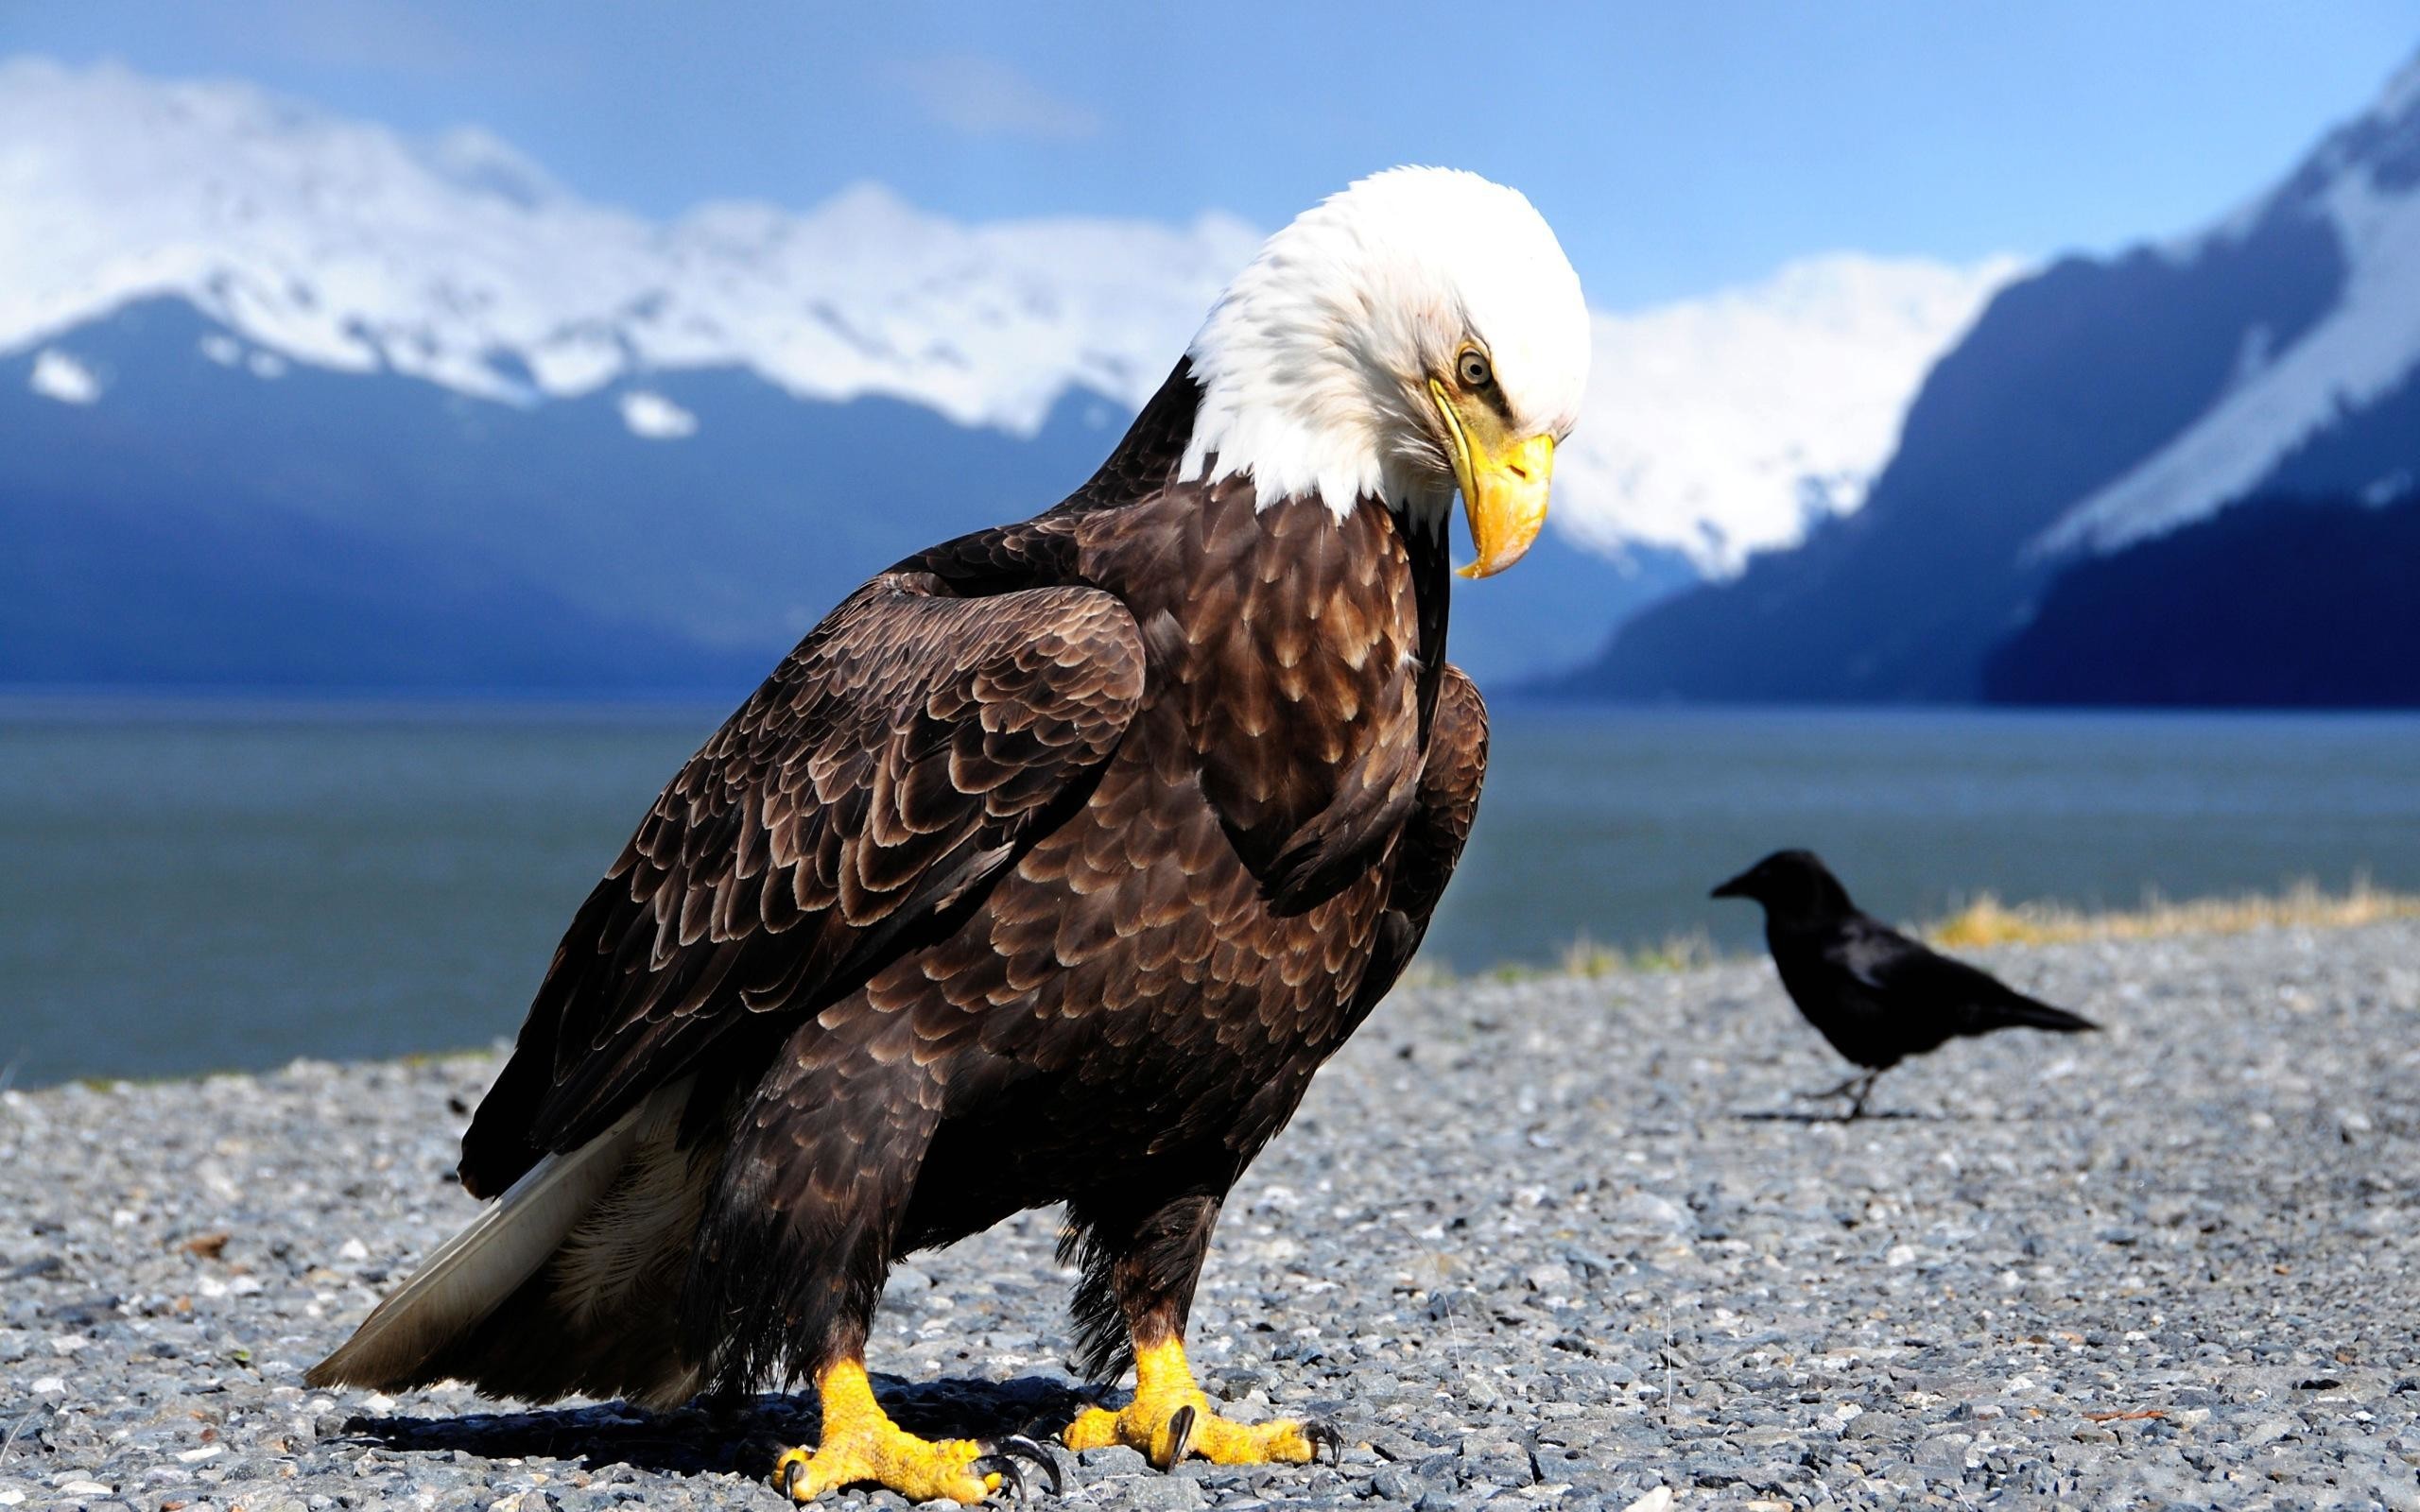 2560x1600 1920x1440 Eagle Wallpapers, Download Eagle HD Wallpapers for Free,  GuoGuiyan 1920Ã—1440 Eagle Wallpapers Free Download (64 Wallpapers) |  Adorable Wallpapers